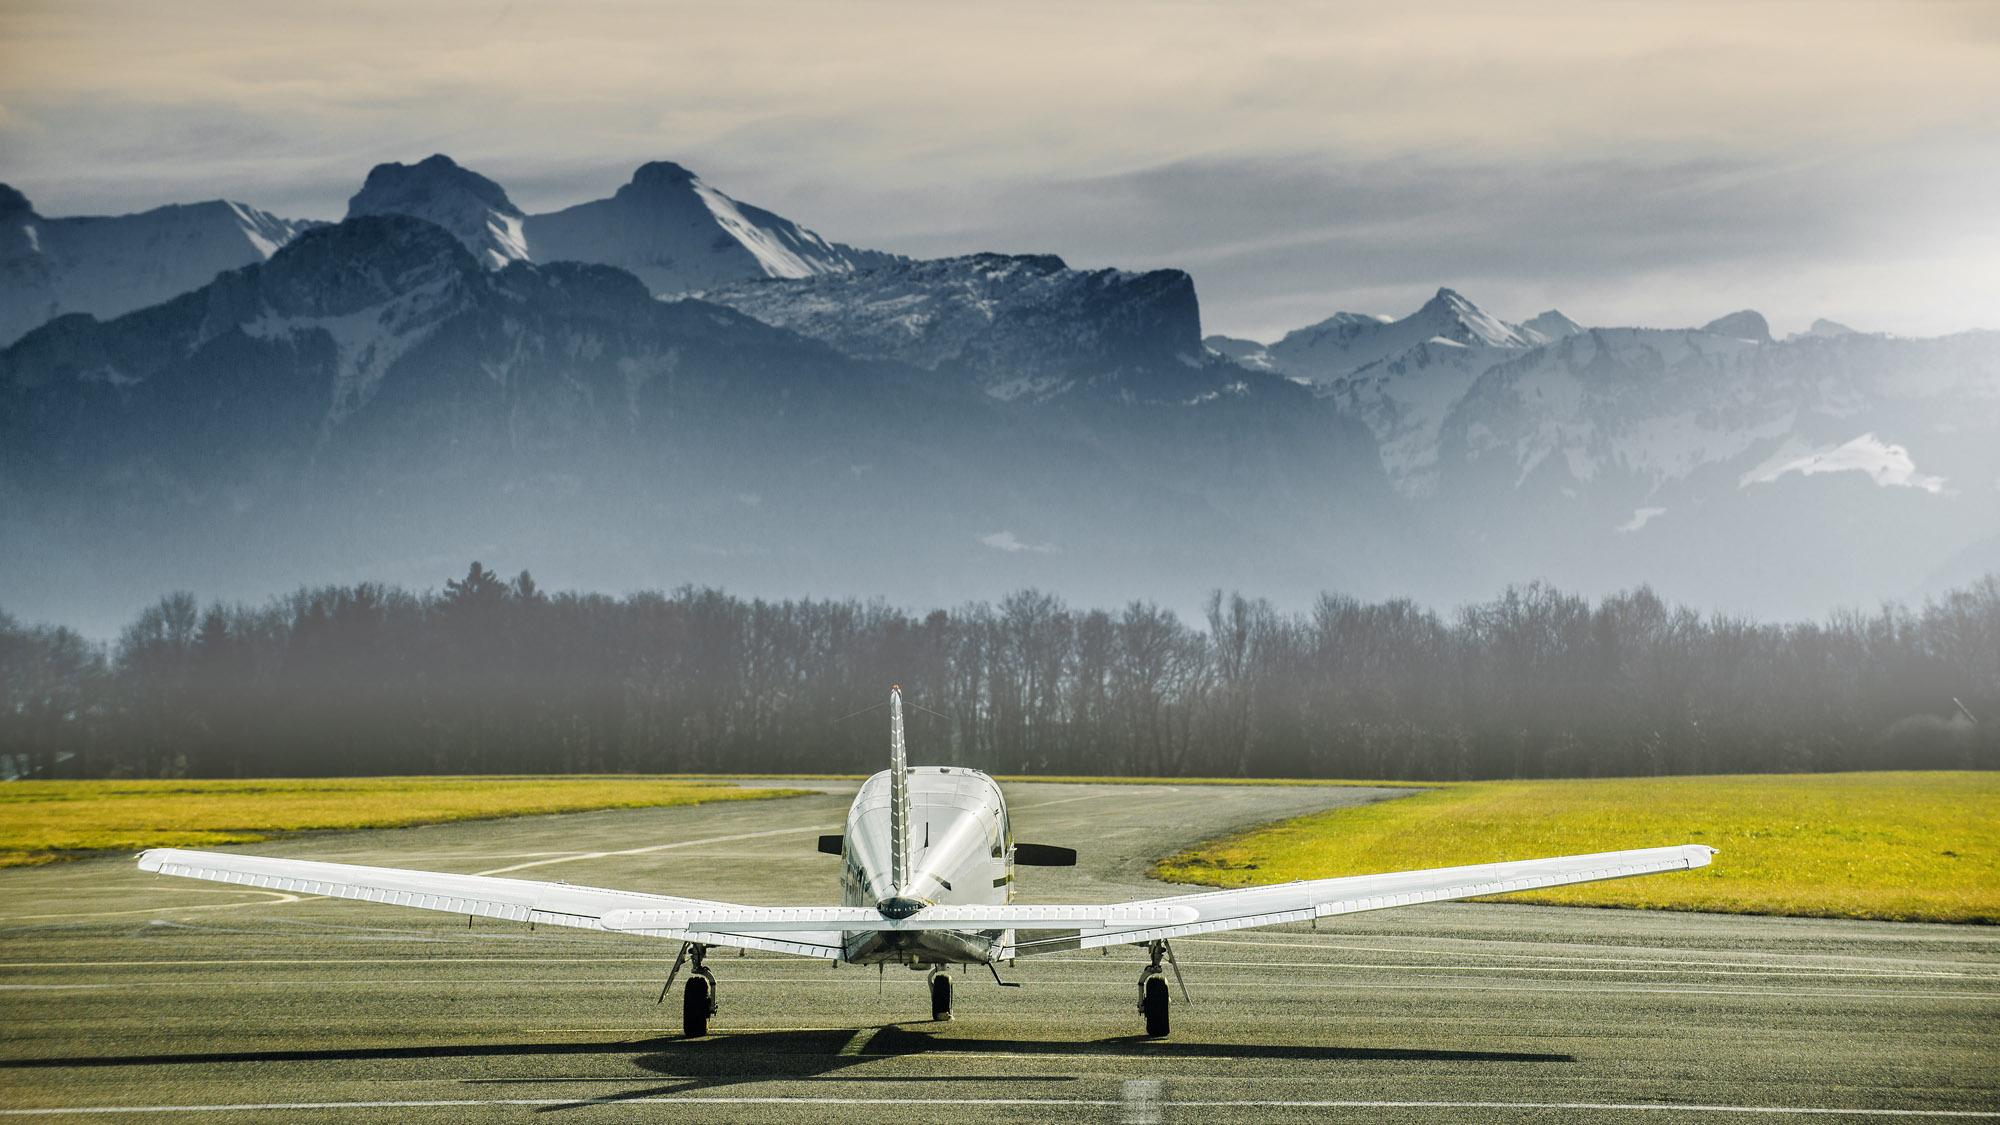 Plane and mountains